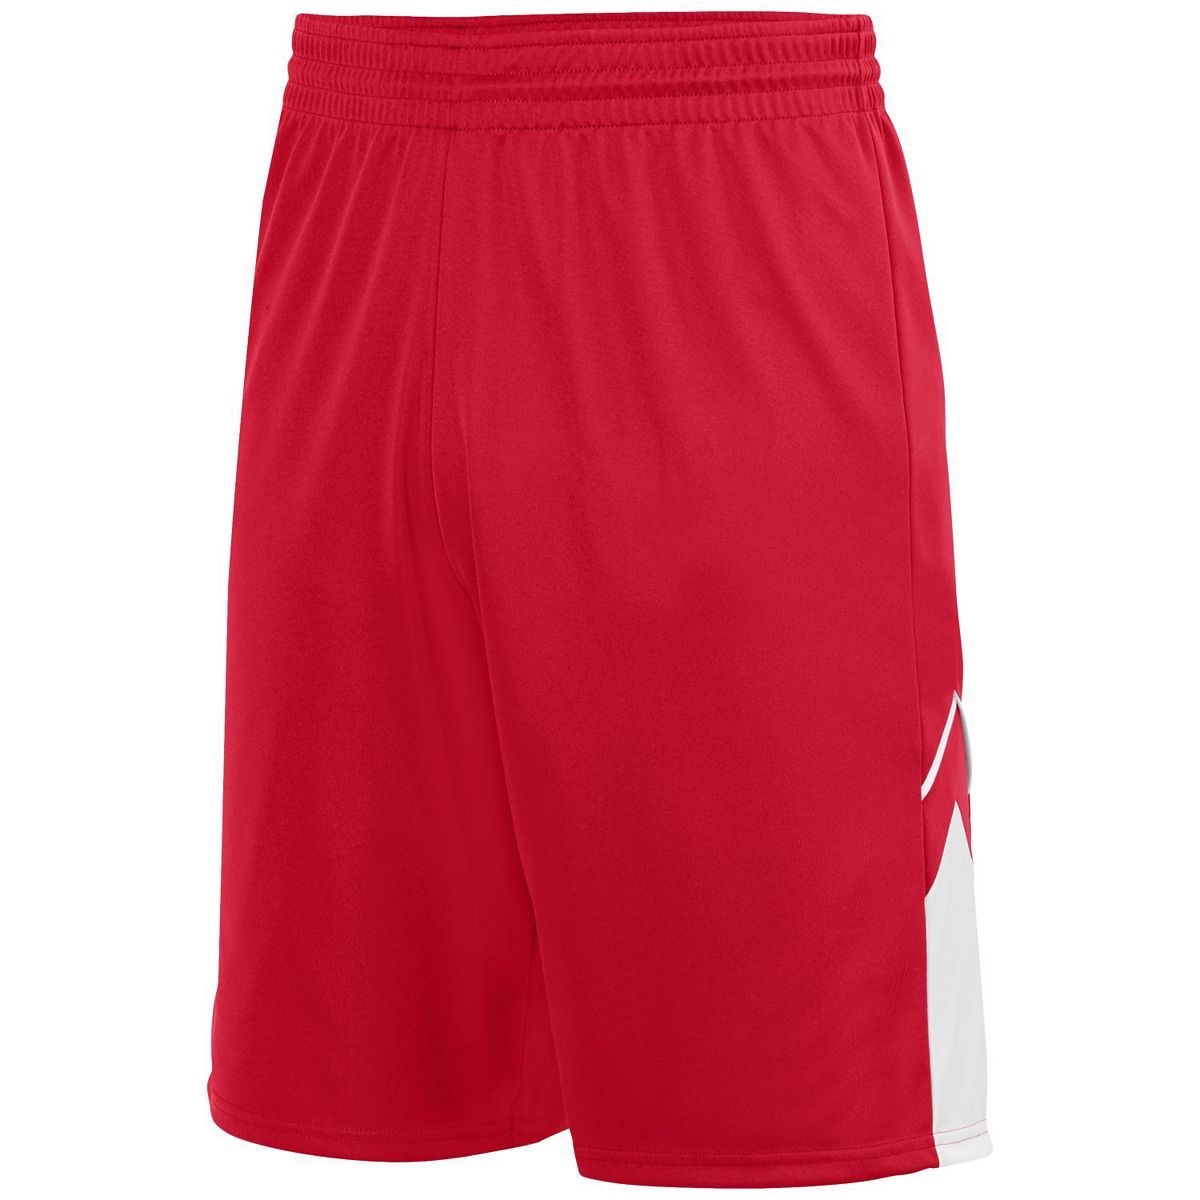 Augusta Sportswear Youth Alley-Oop Reversible Shorts in Red/White  -Part of the Youth, Youth-Shorts, Augusta-Products, Basketball, All-Sports, All-Sports-1 product lines at KanaleyCreations.com